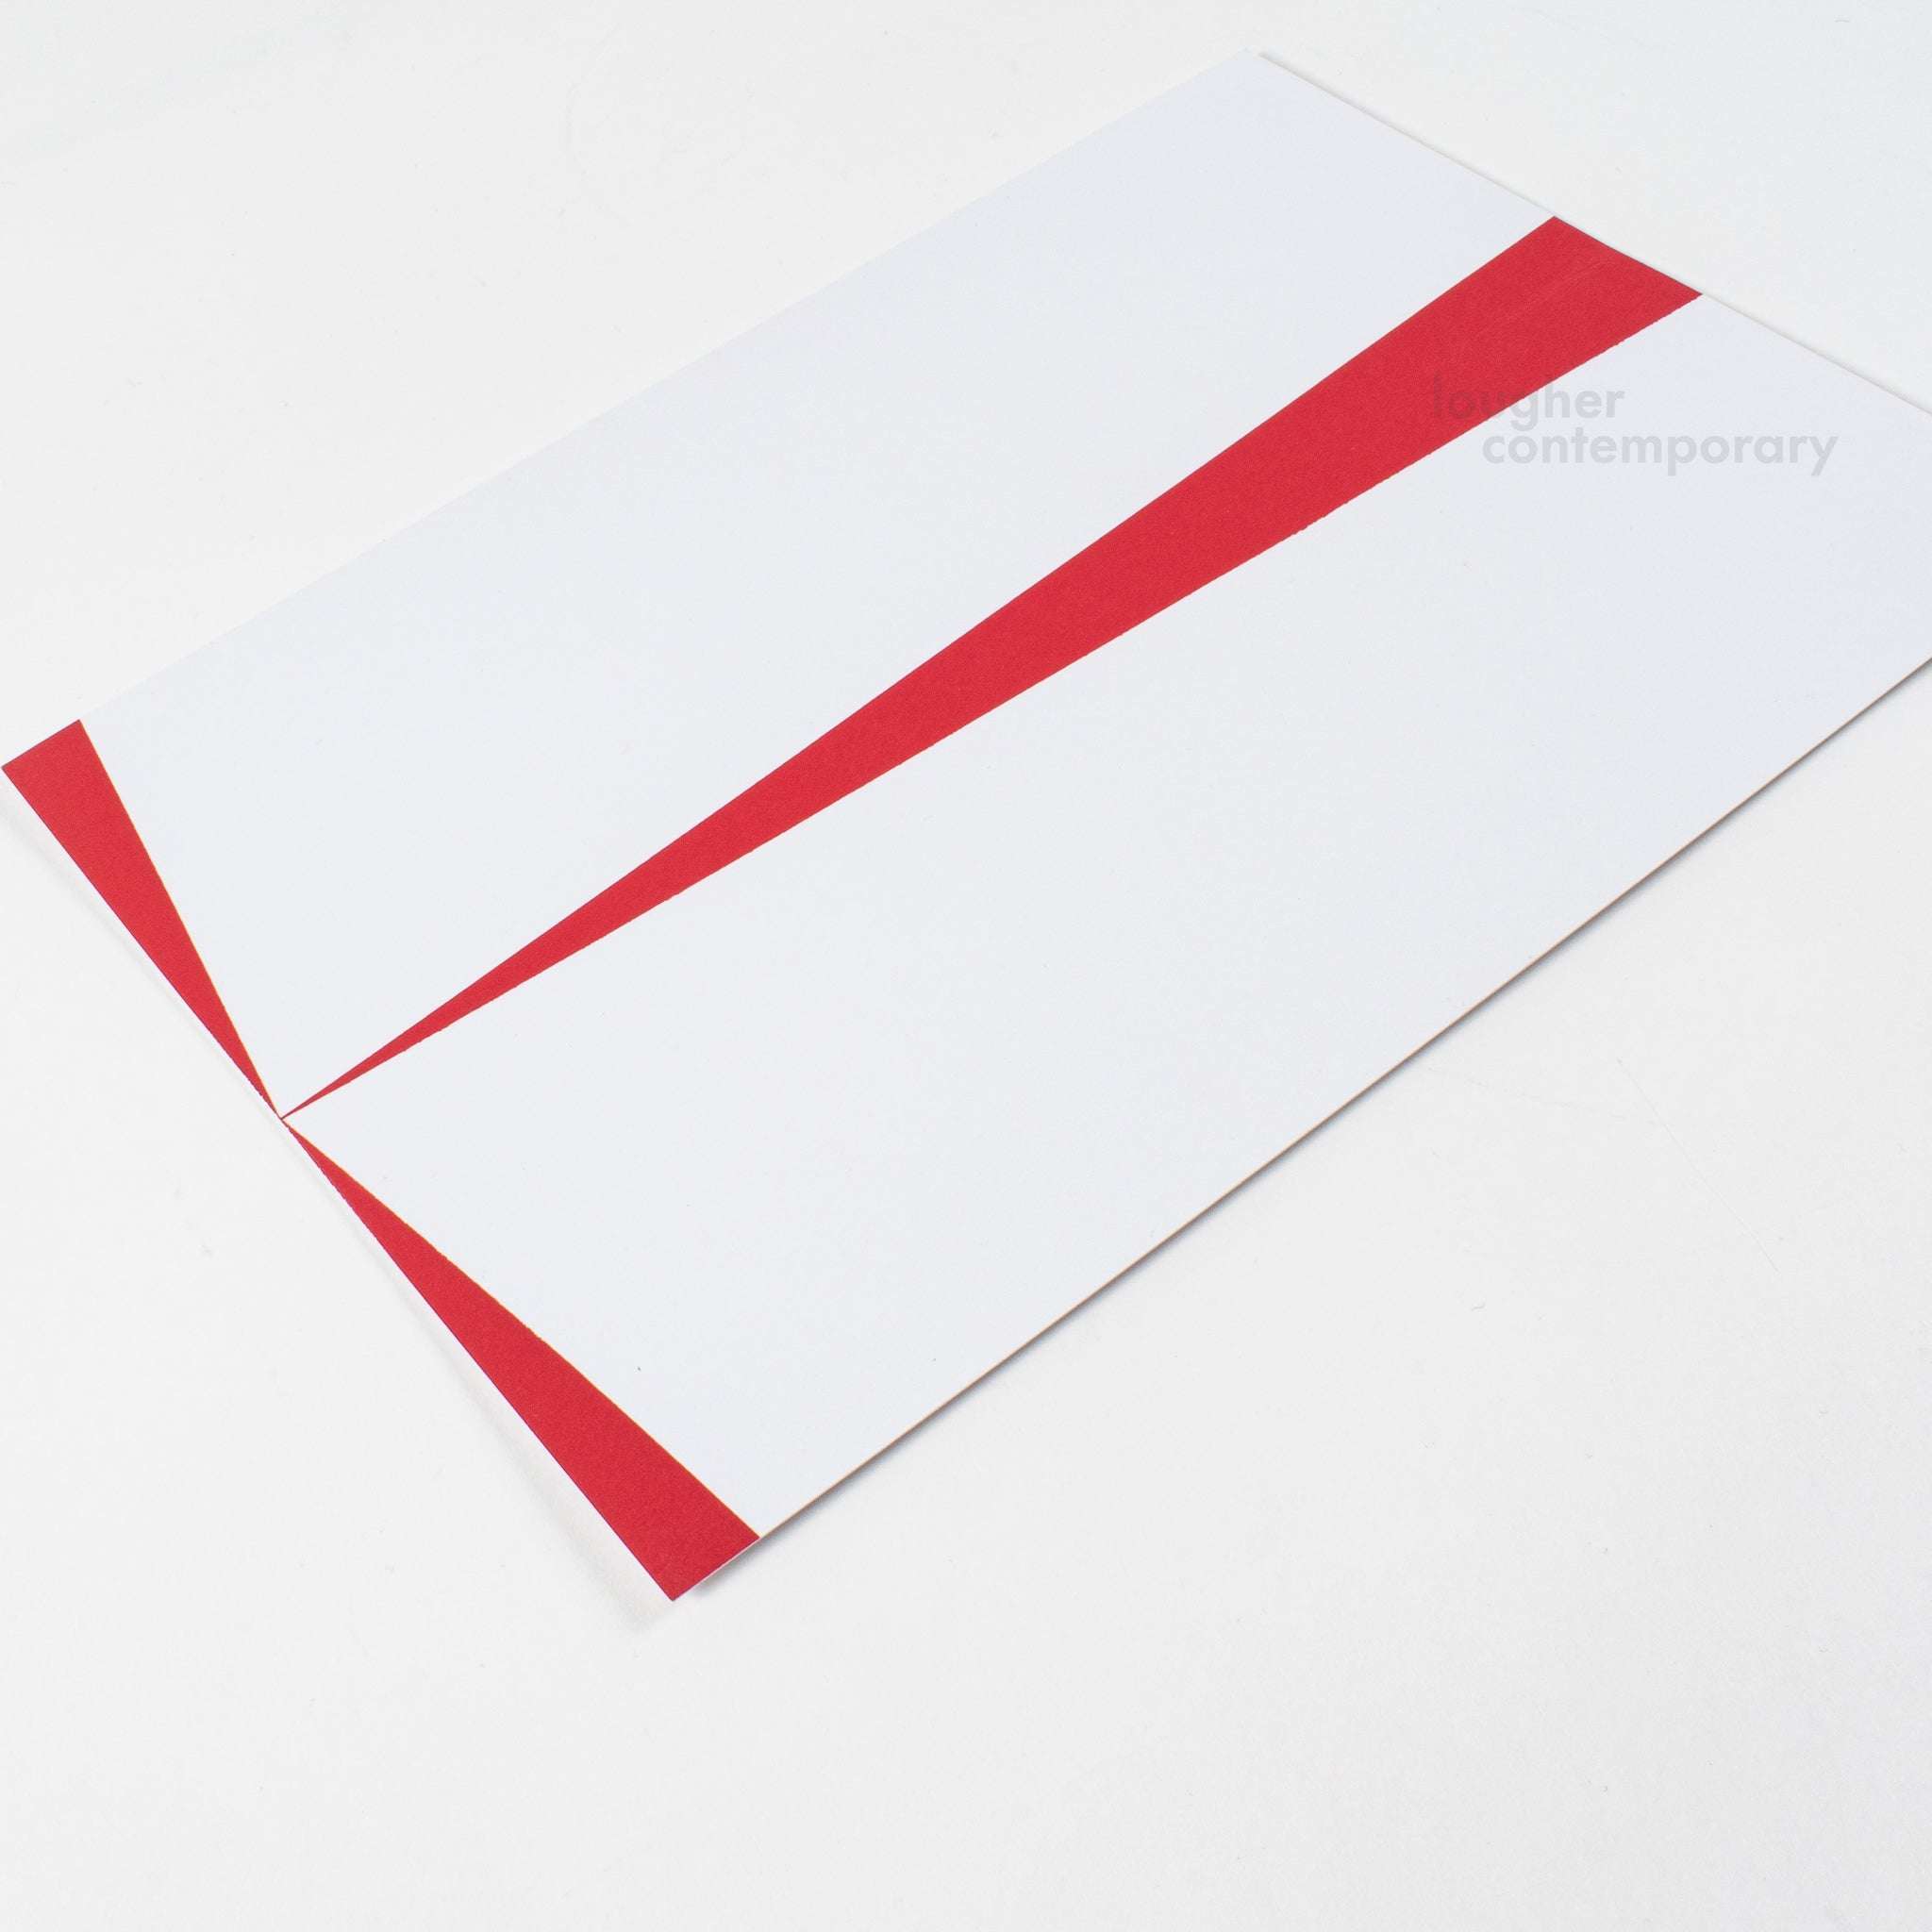 Carmen Herrera, Untitled (Red and White), 2011 For Sale - Lougher Contemporary